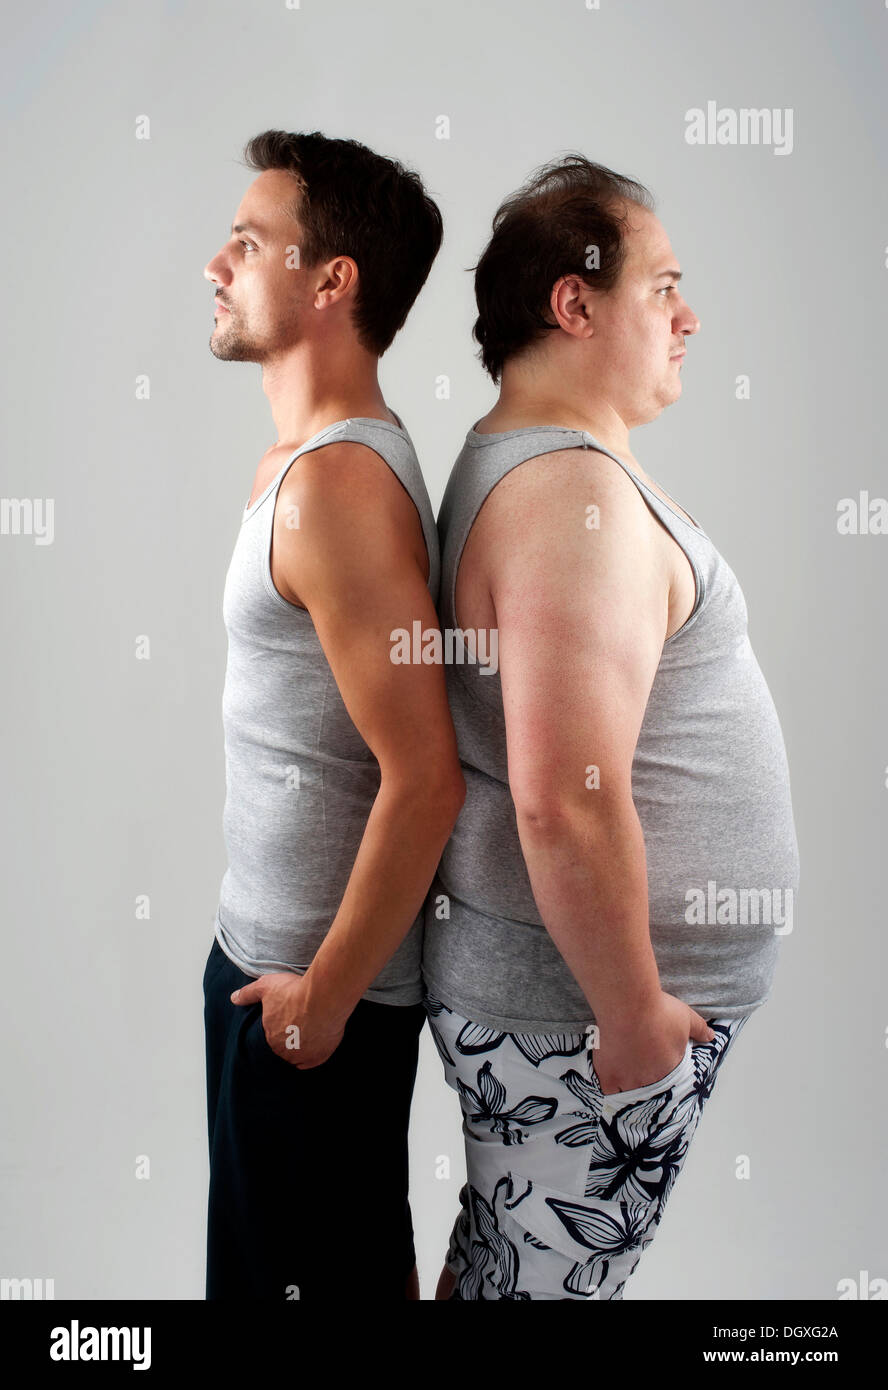 Back fat Stock Photos, Royalty Free Back fat Images